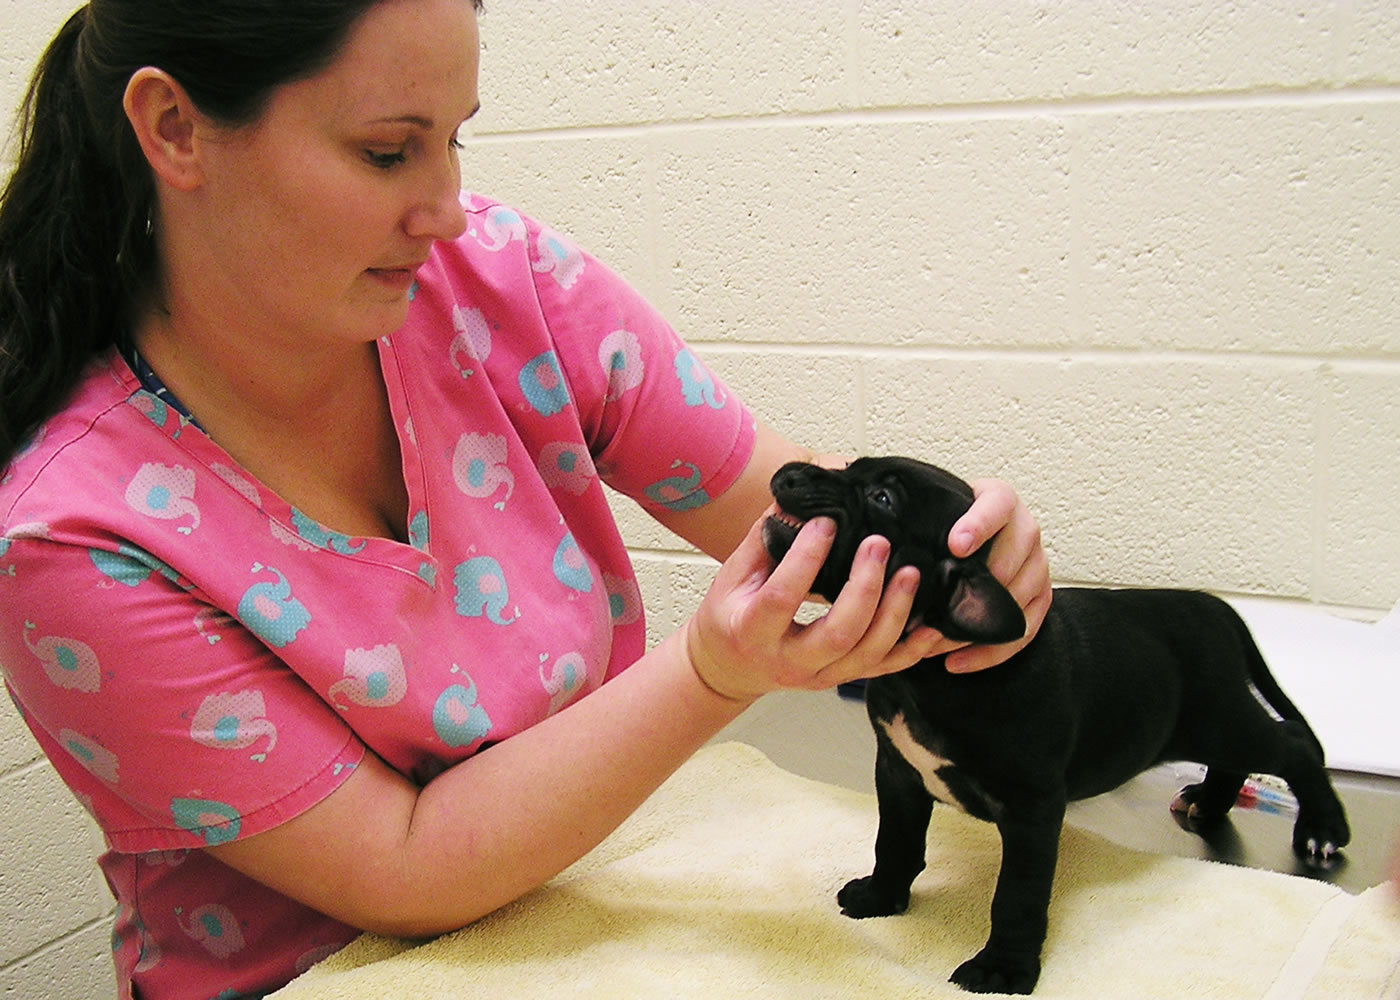 Janet Winikoff/ Humane Society of Vero Beach and Indian River County
Veterinary technician Aubrey Mallory checks the teeth of a 6-week-old male pit bull mix named Kobe in Vero Beach, Fla. Regular exams help spot bad breath, an early warning sign of pet dental disease.